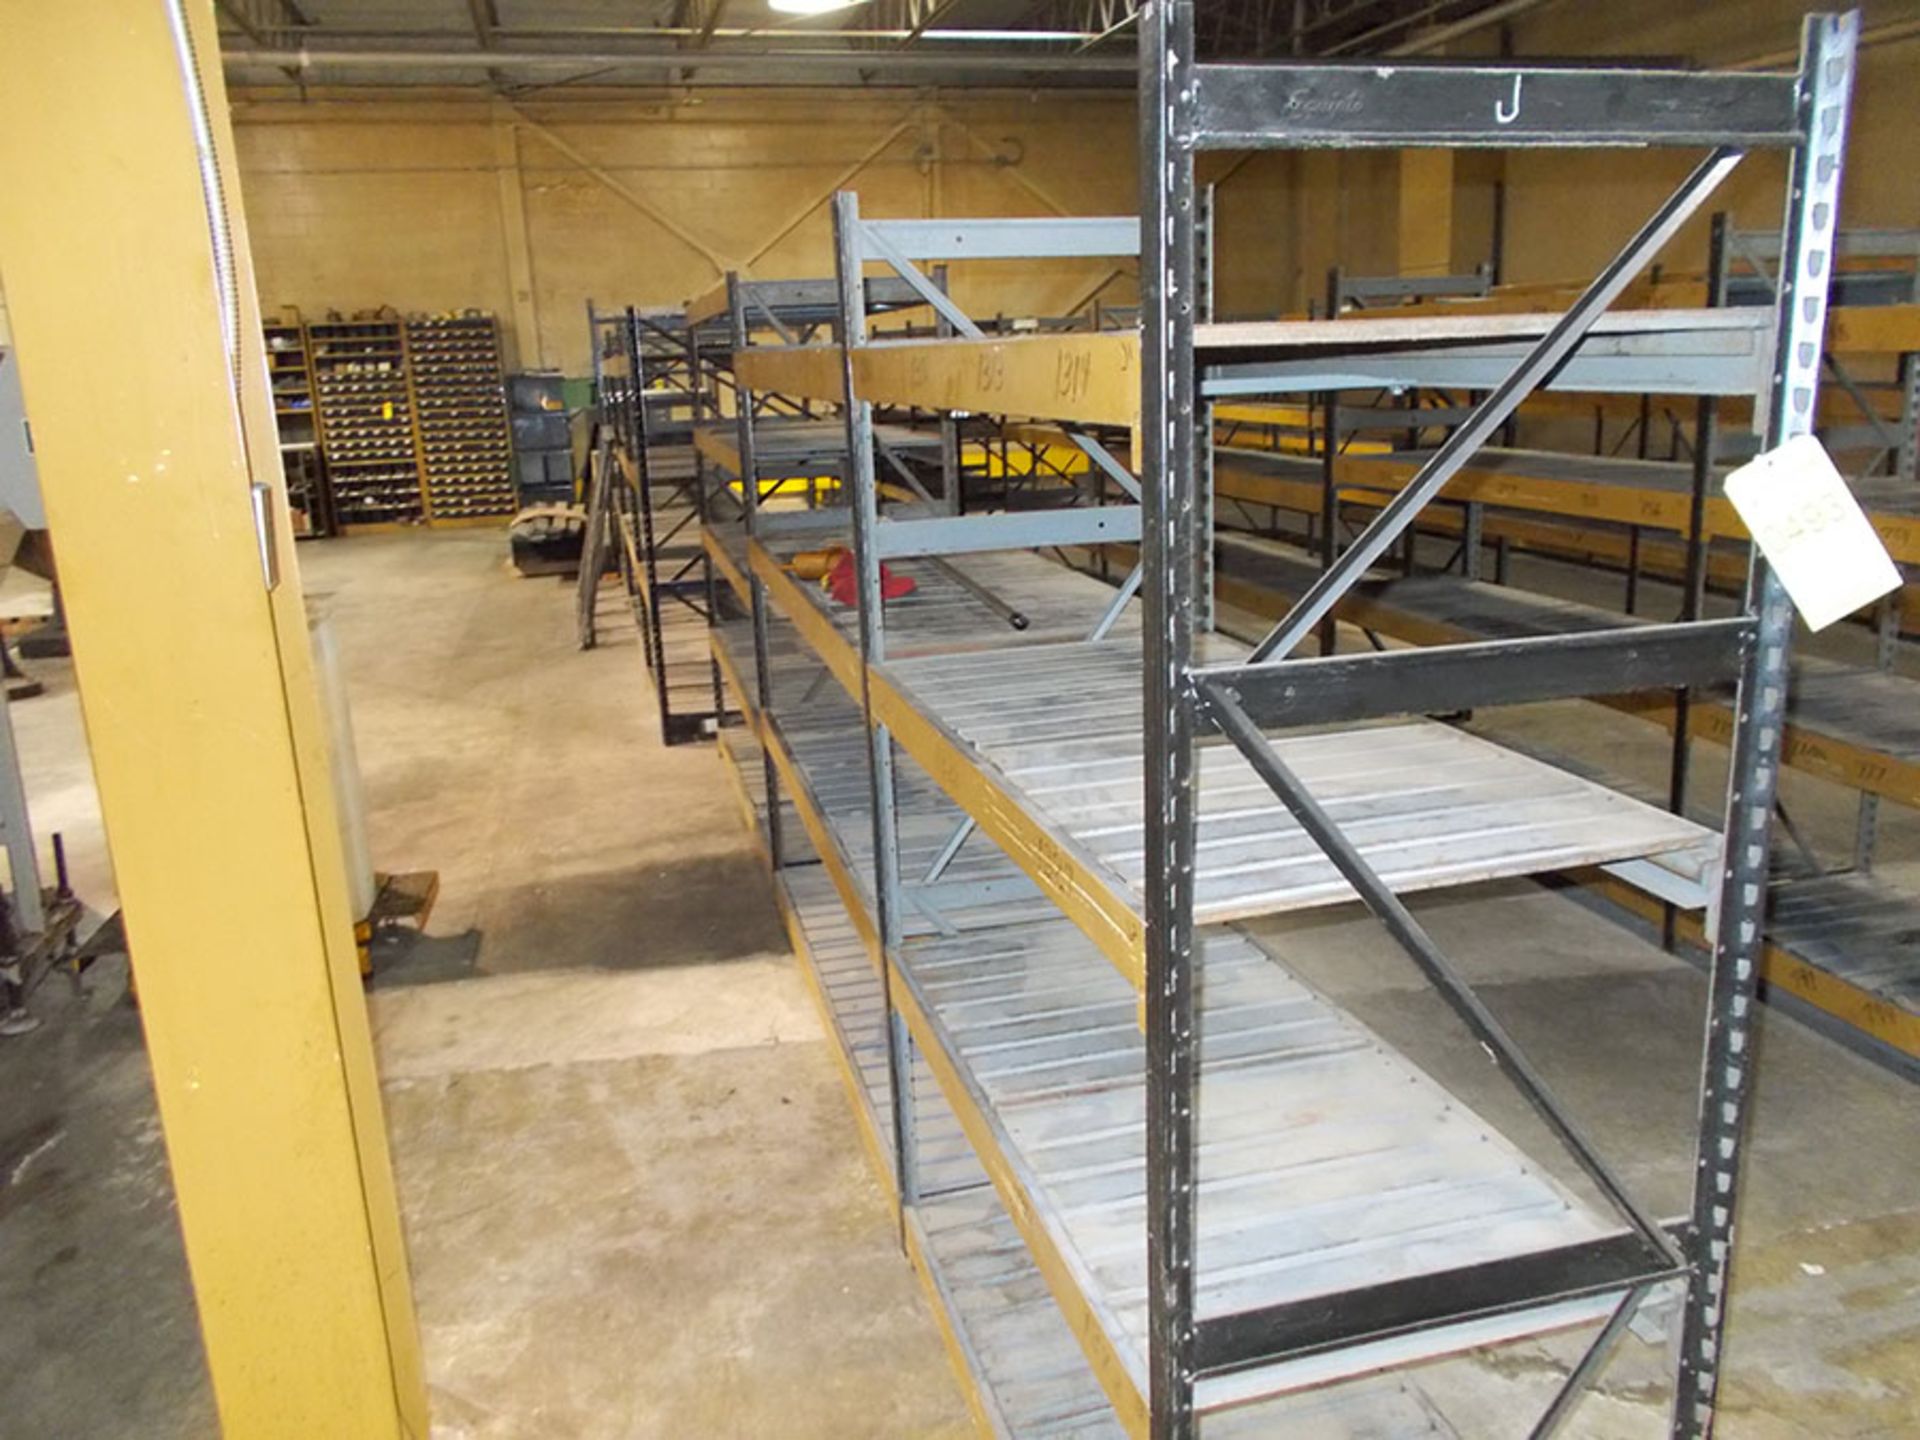 (8) SECTIONS OF ASSORTED SHELVING